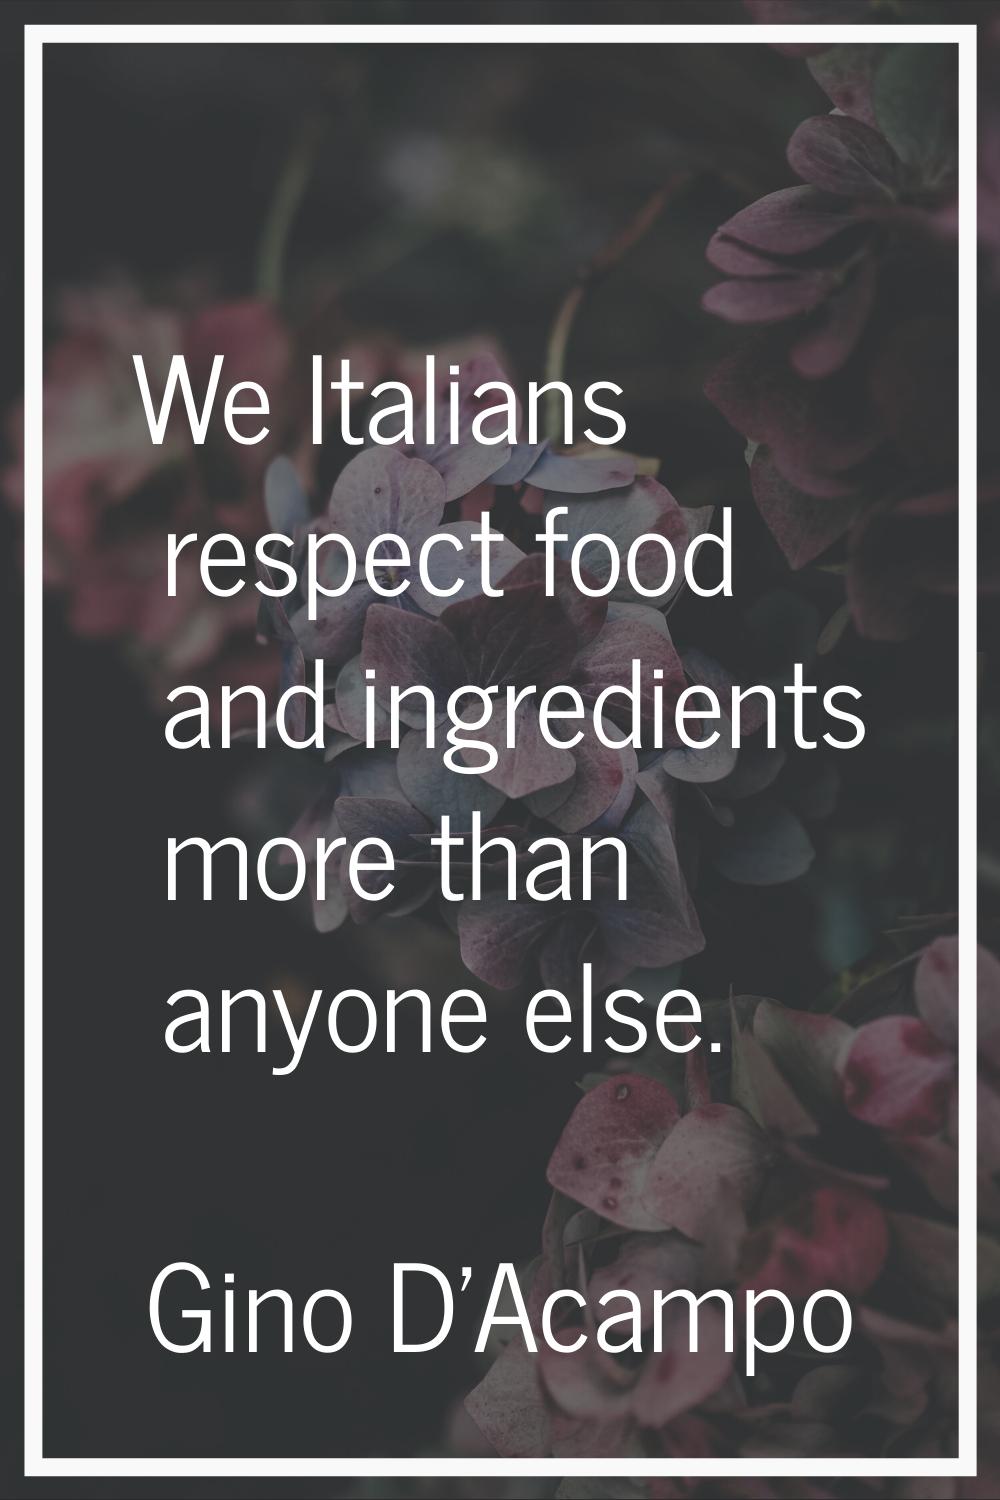 We Italians respect food and ingredients more than anyone else.